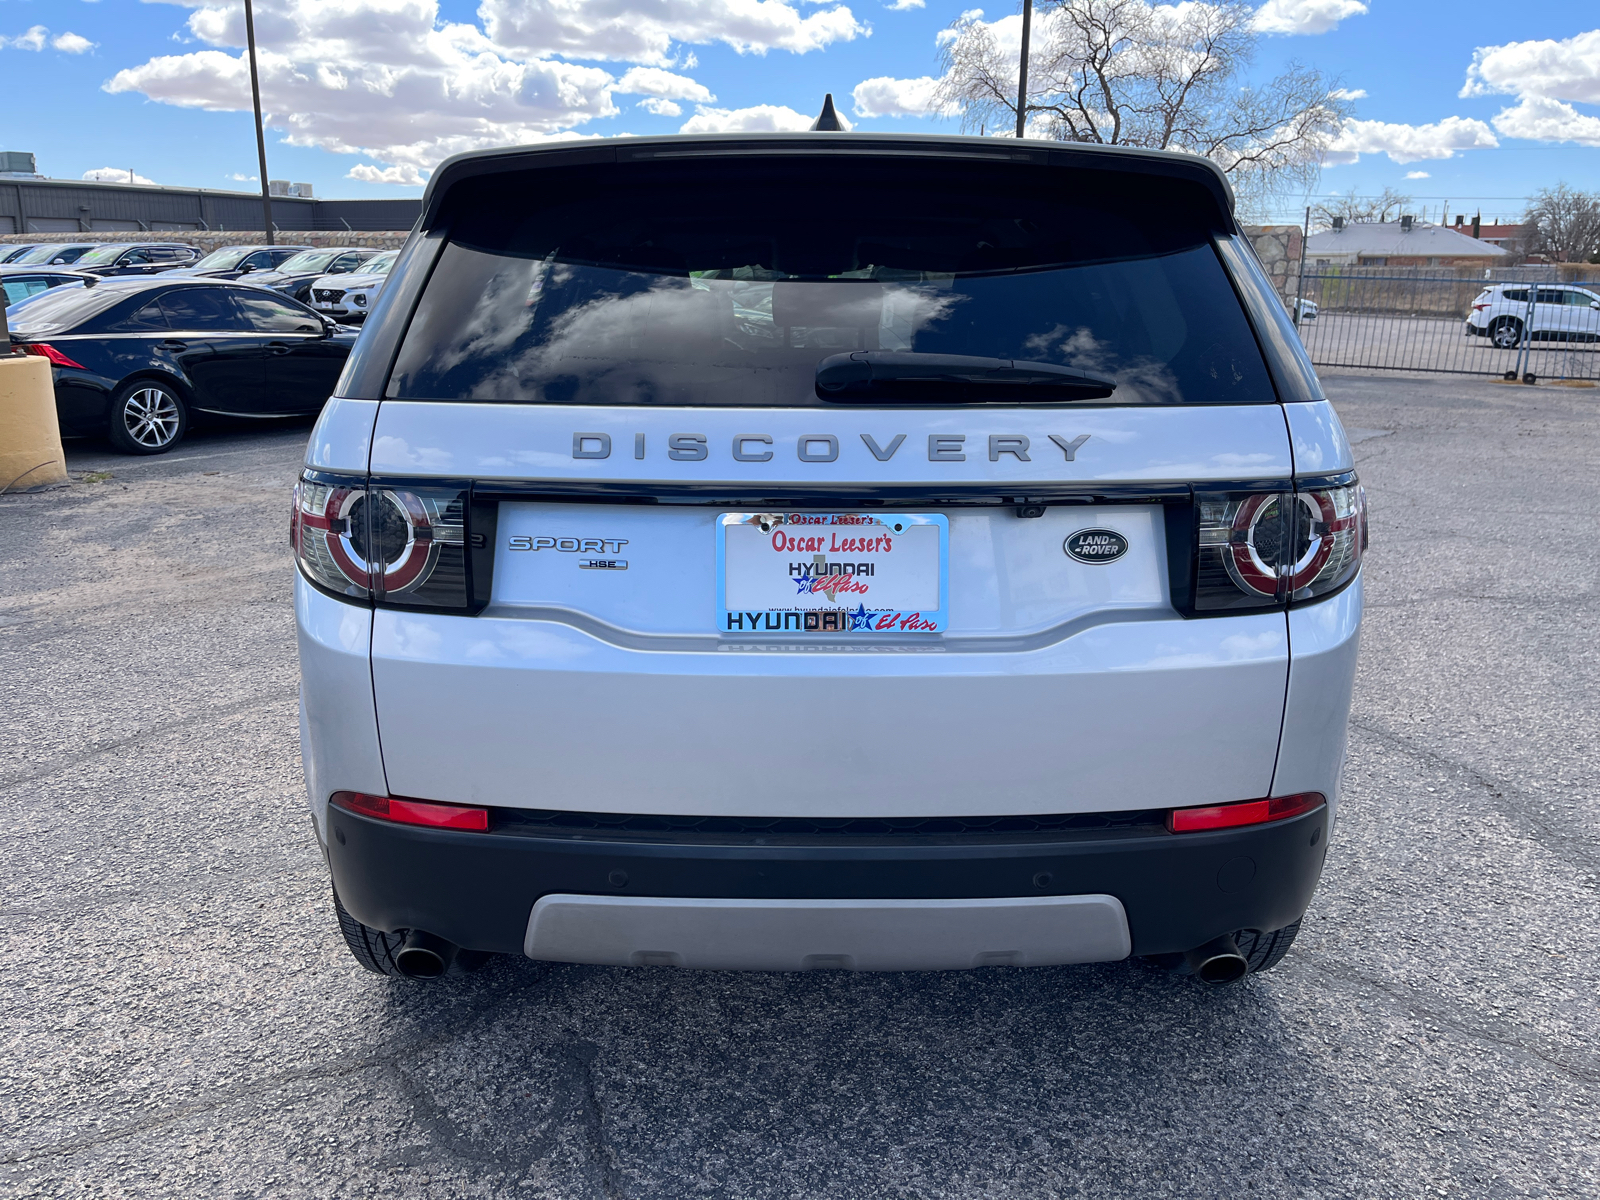 2017 Land Rover Discovery Sport HSE 7